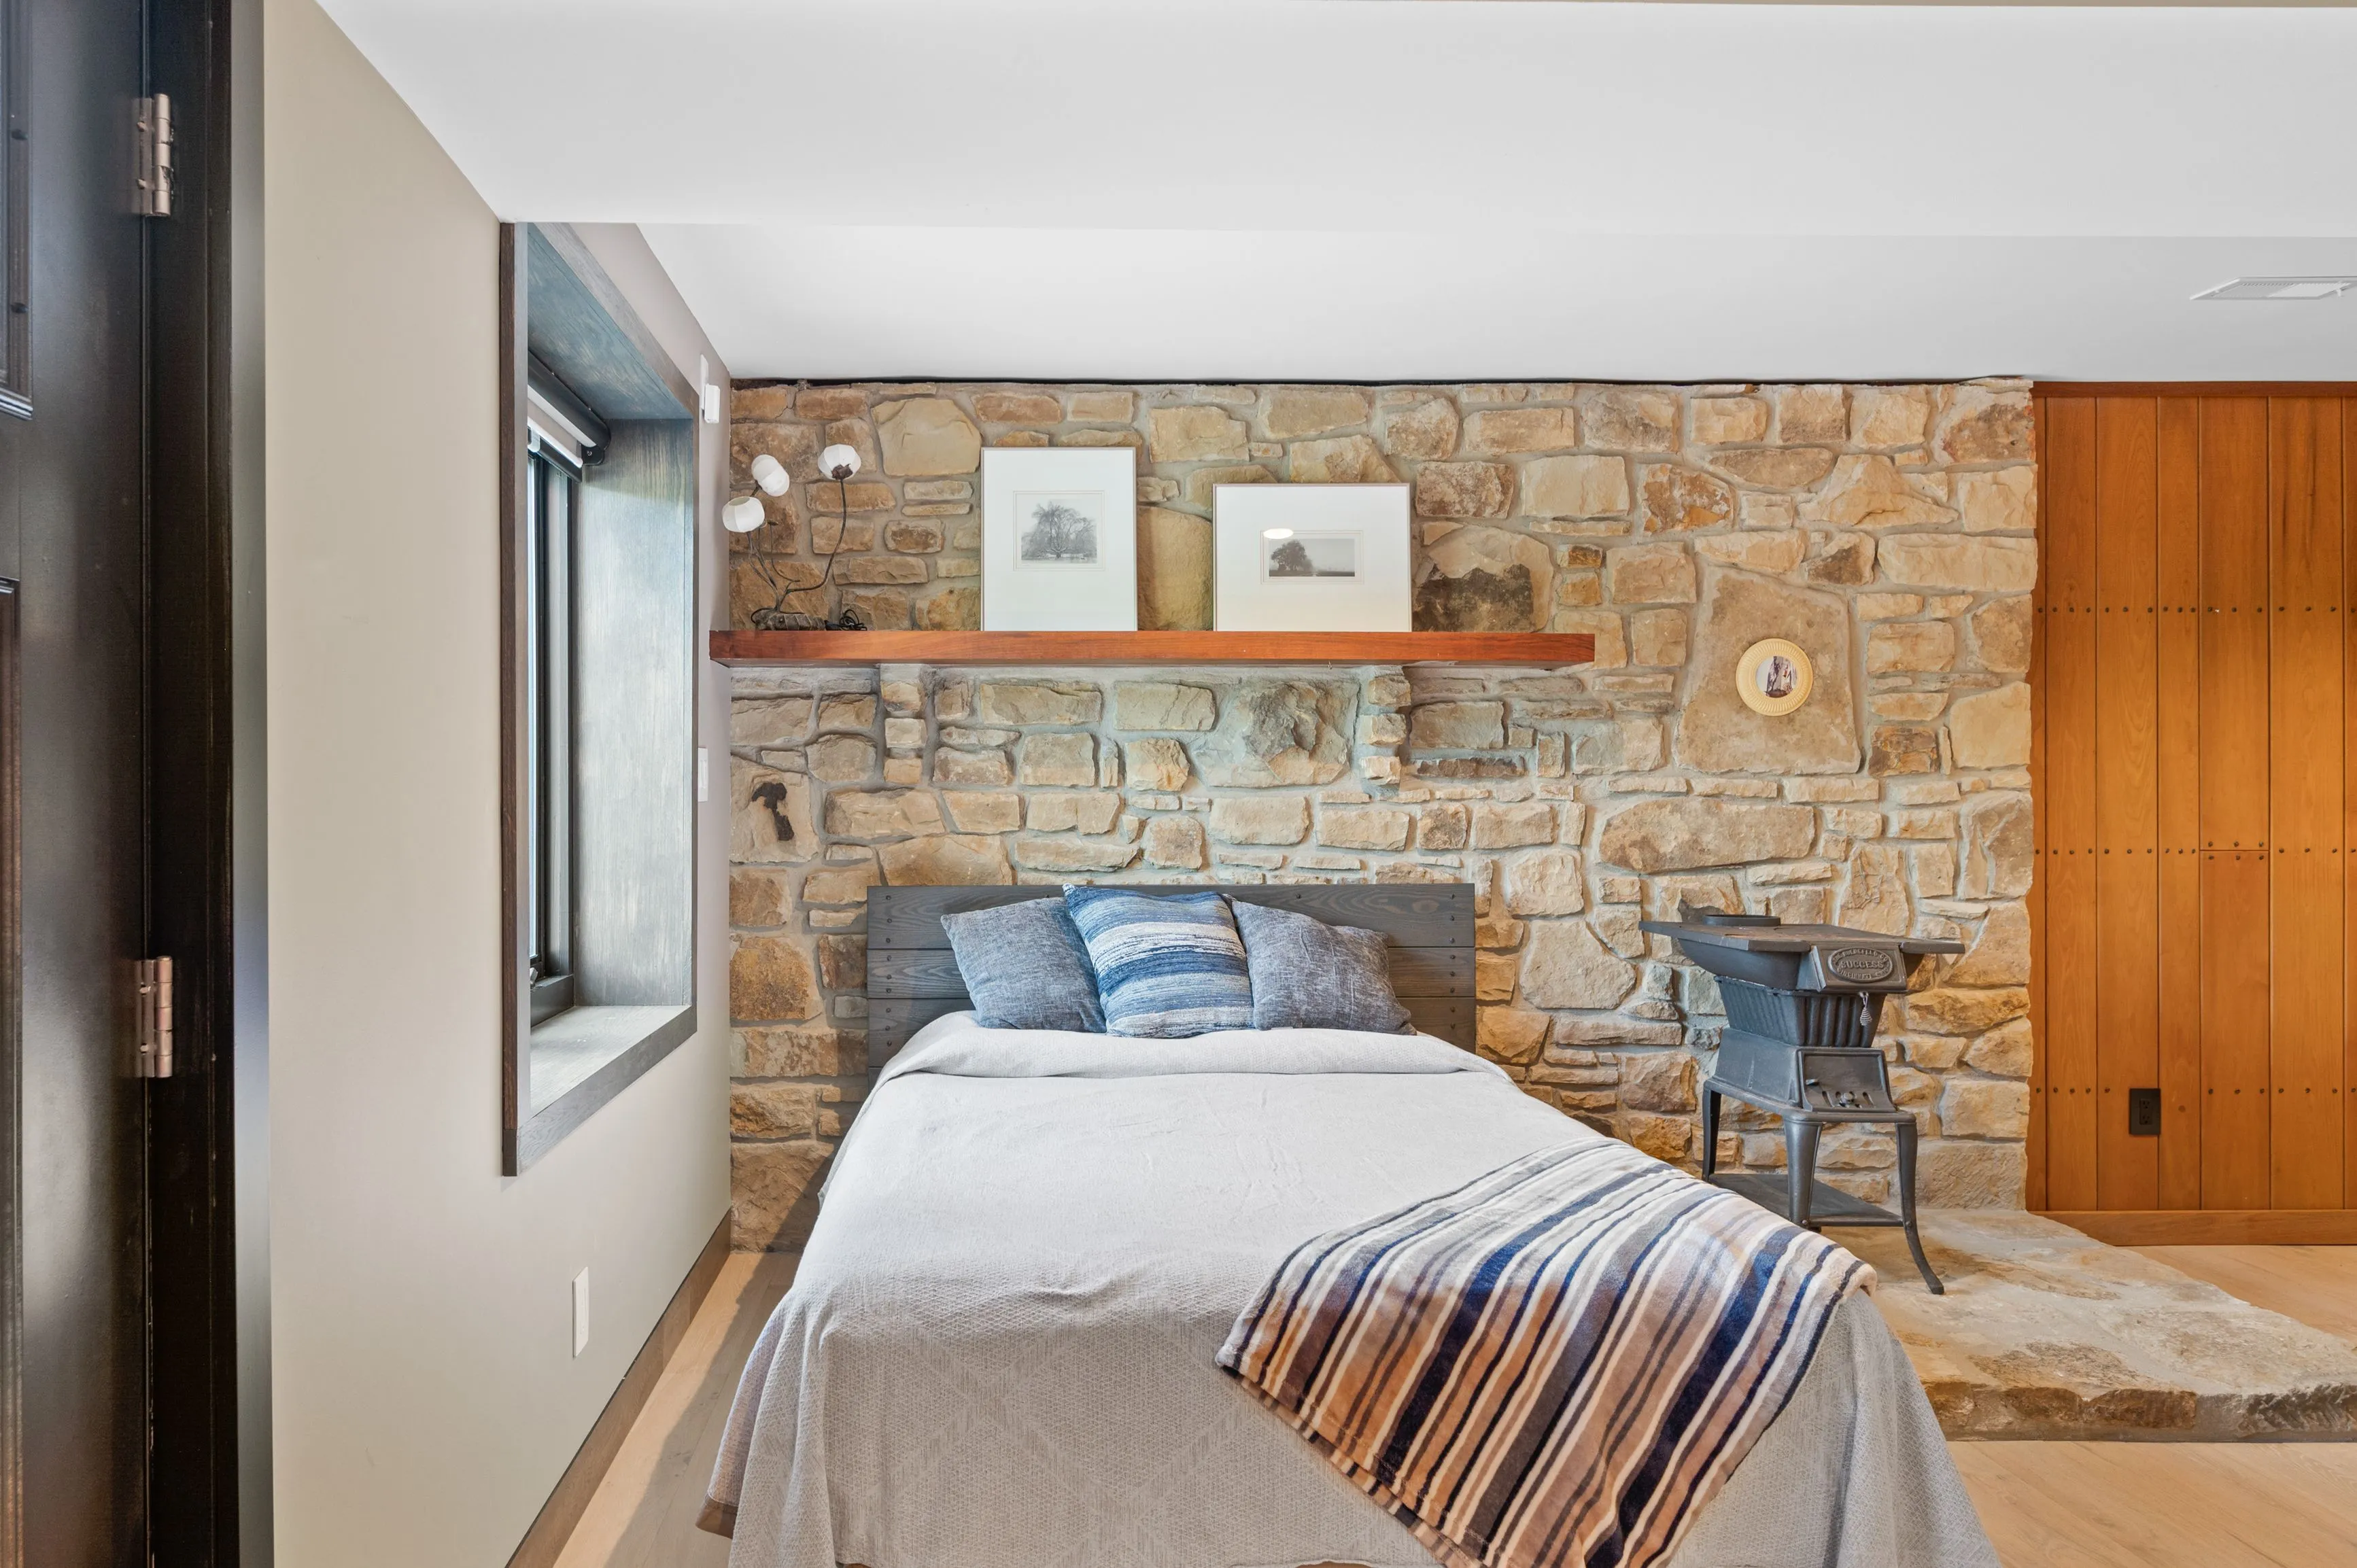 Modern bedroom interior with stone wall, wooden headboard and accents, grey bedding, and vintage wood stove.